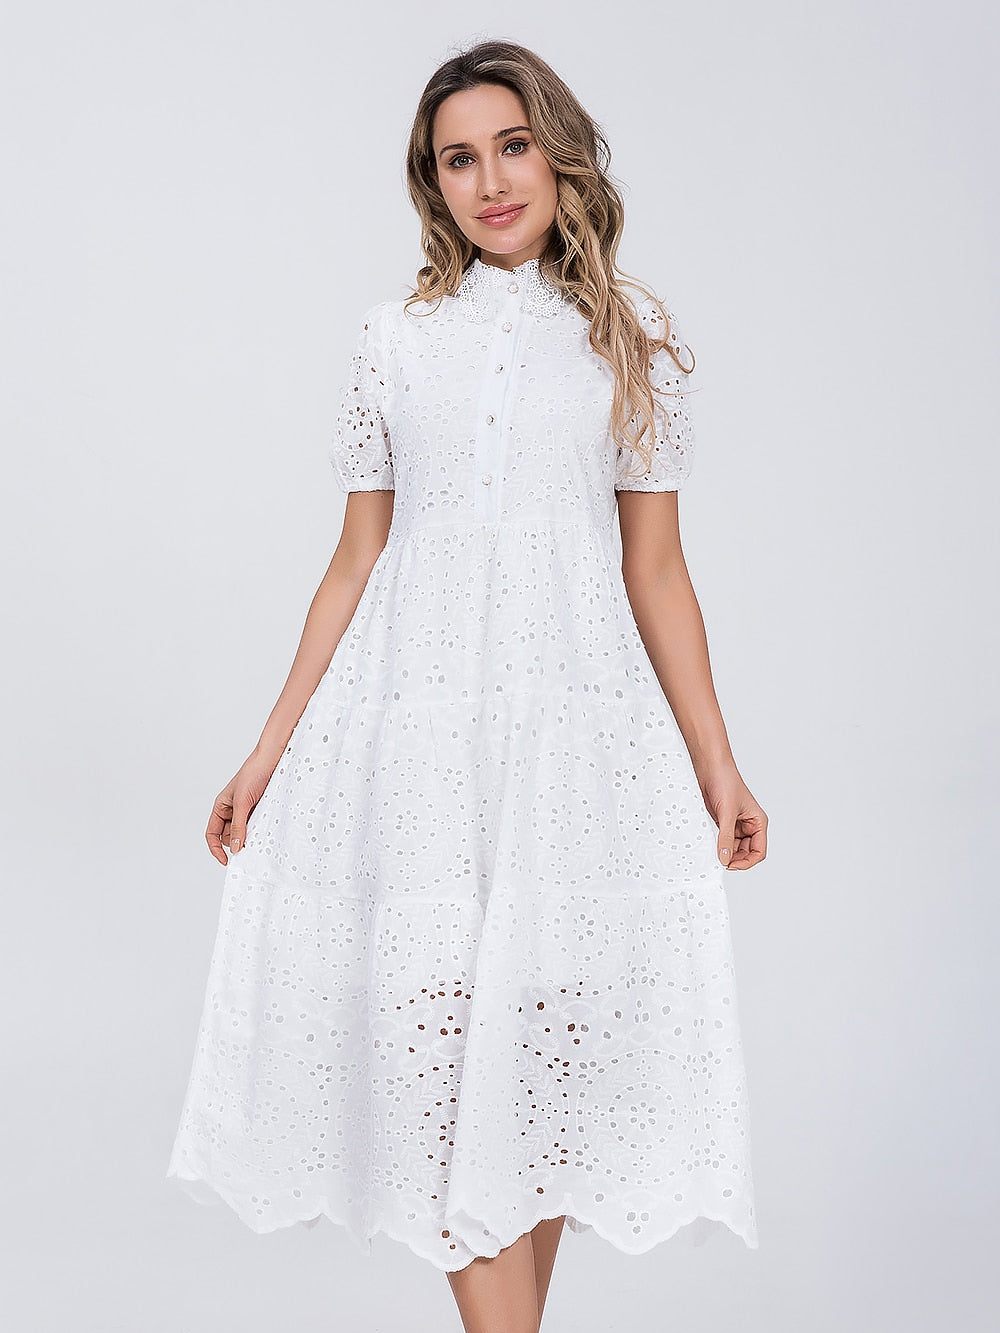 Women Cotton Hollow Out Summer White dress - WD8188